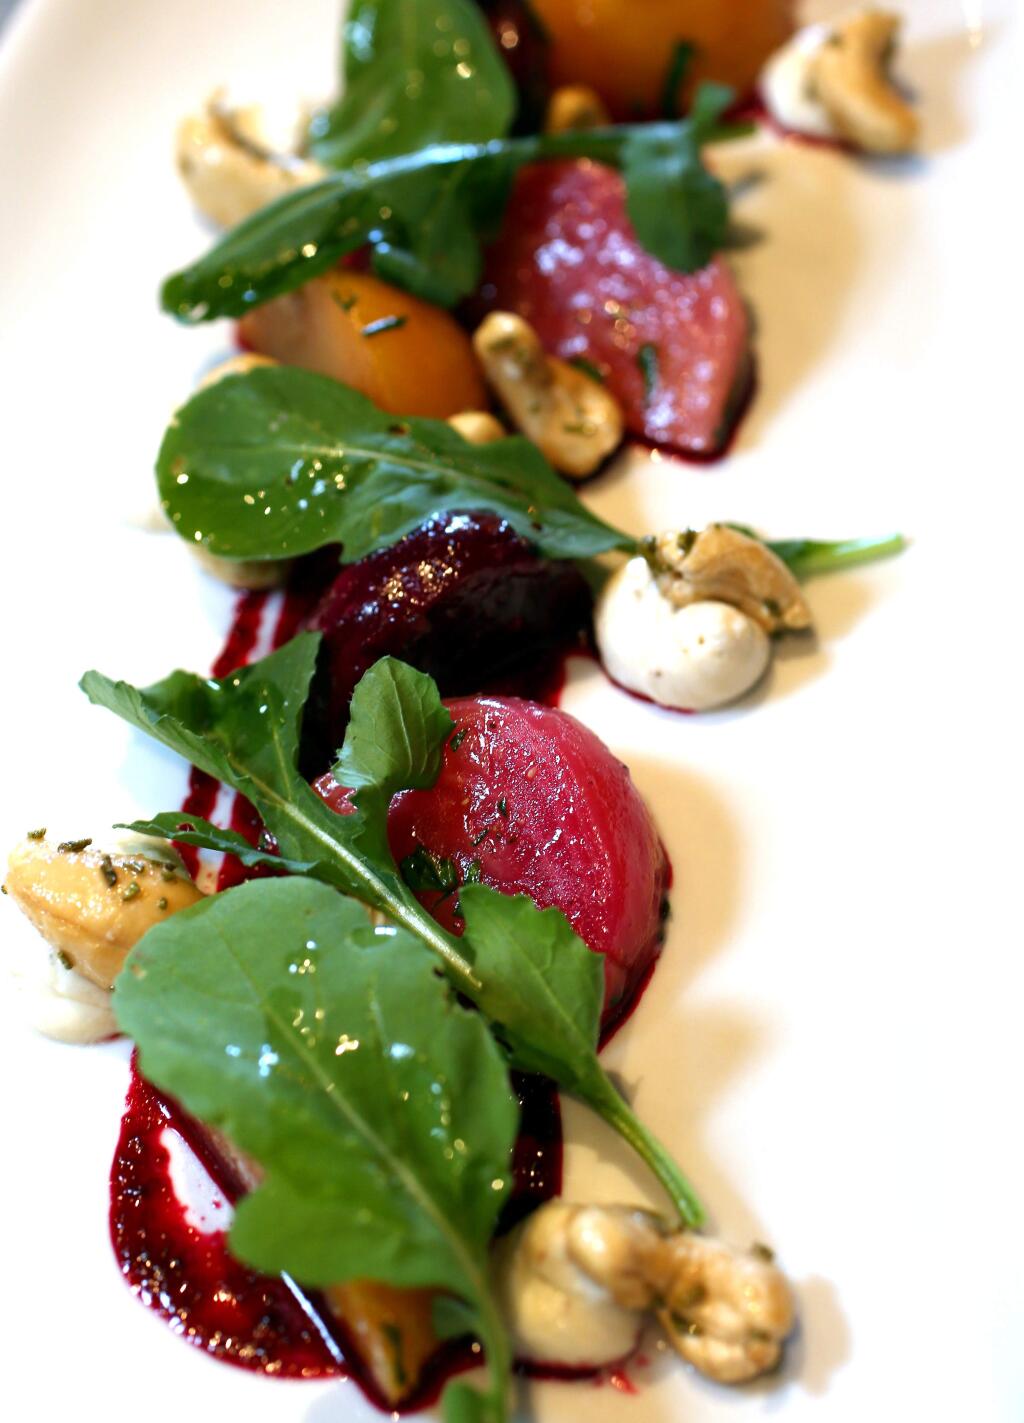 County Line Beets with Redwood Hill Chèvre, wild arugula, rosemary cashews and Cabernet vinaigrette served at Earth's Bounty Kitchen and Wine Bar in Santa Rosa, Tuesday, September 23, 2014. (Crista Jeremiason / The Press Democrat)